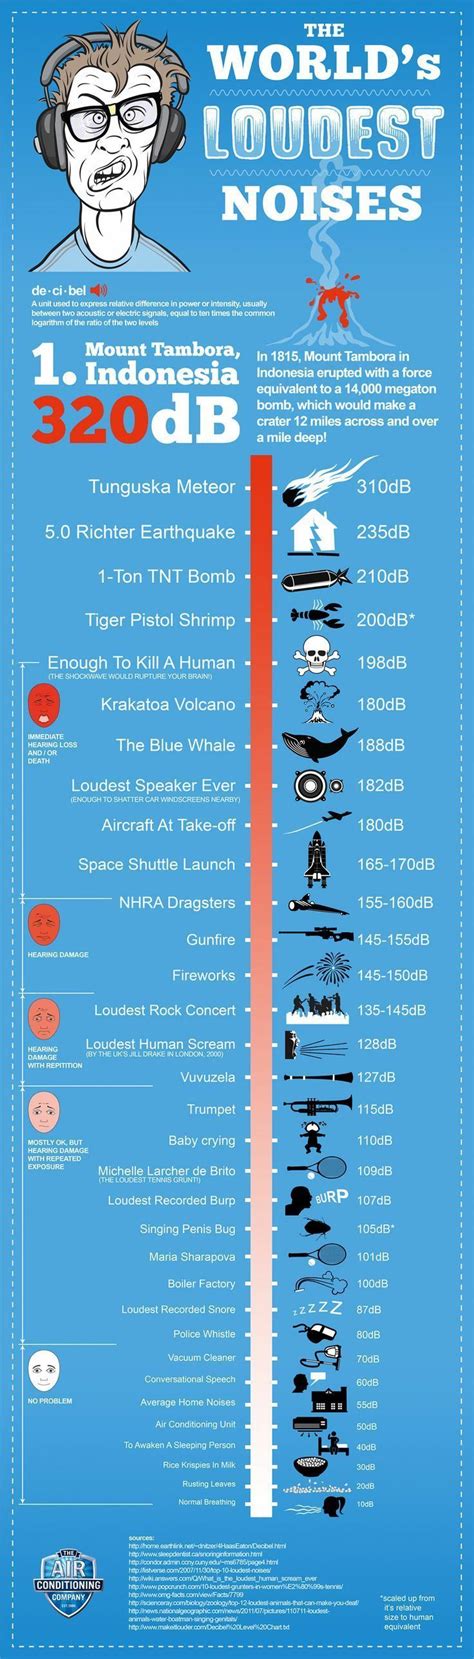 The Worlds Loudest Noises Info Graphic For Teaching Volume And Sound